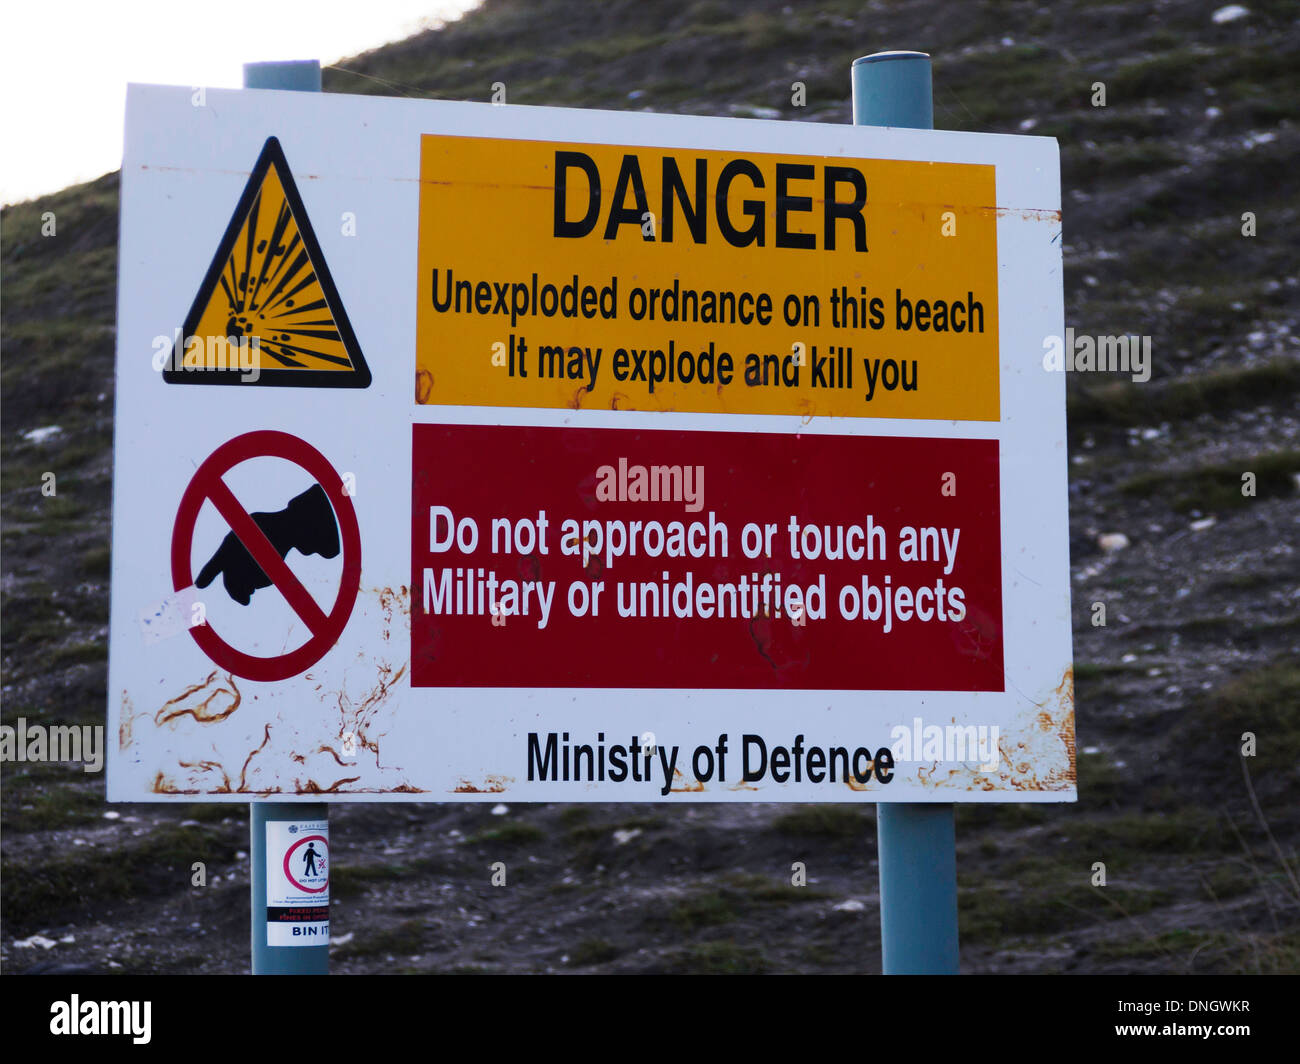 Warning notice sign Danger Unexploded ordnance on this beach it may explode and kill you Ministry of Defence Stock Photo